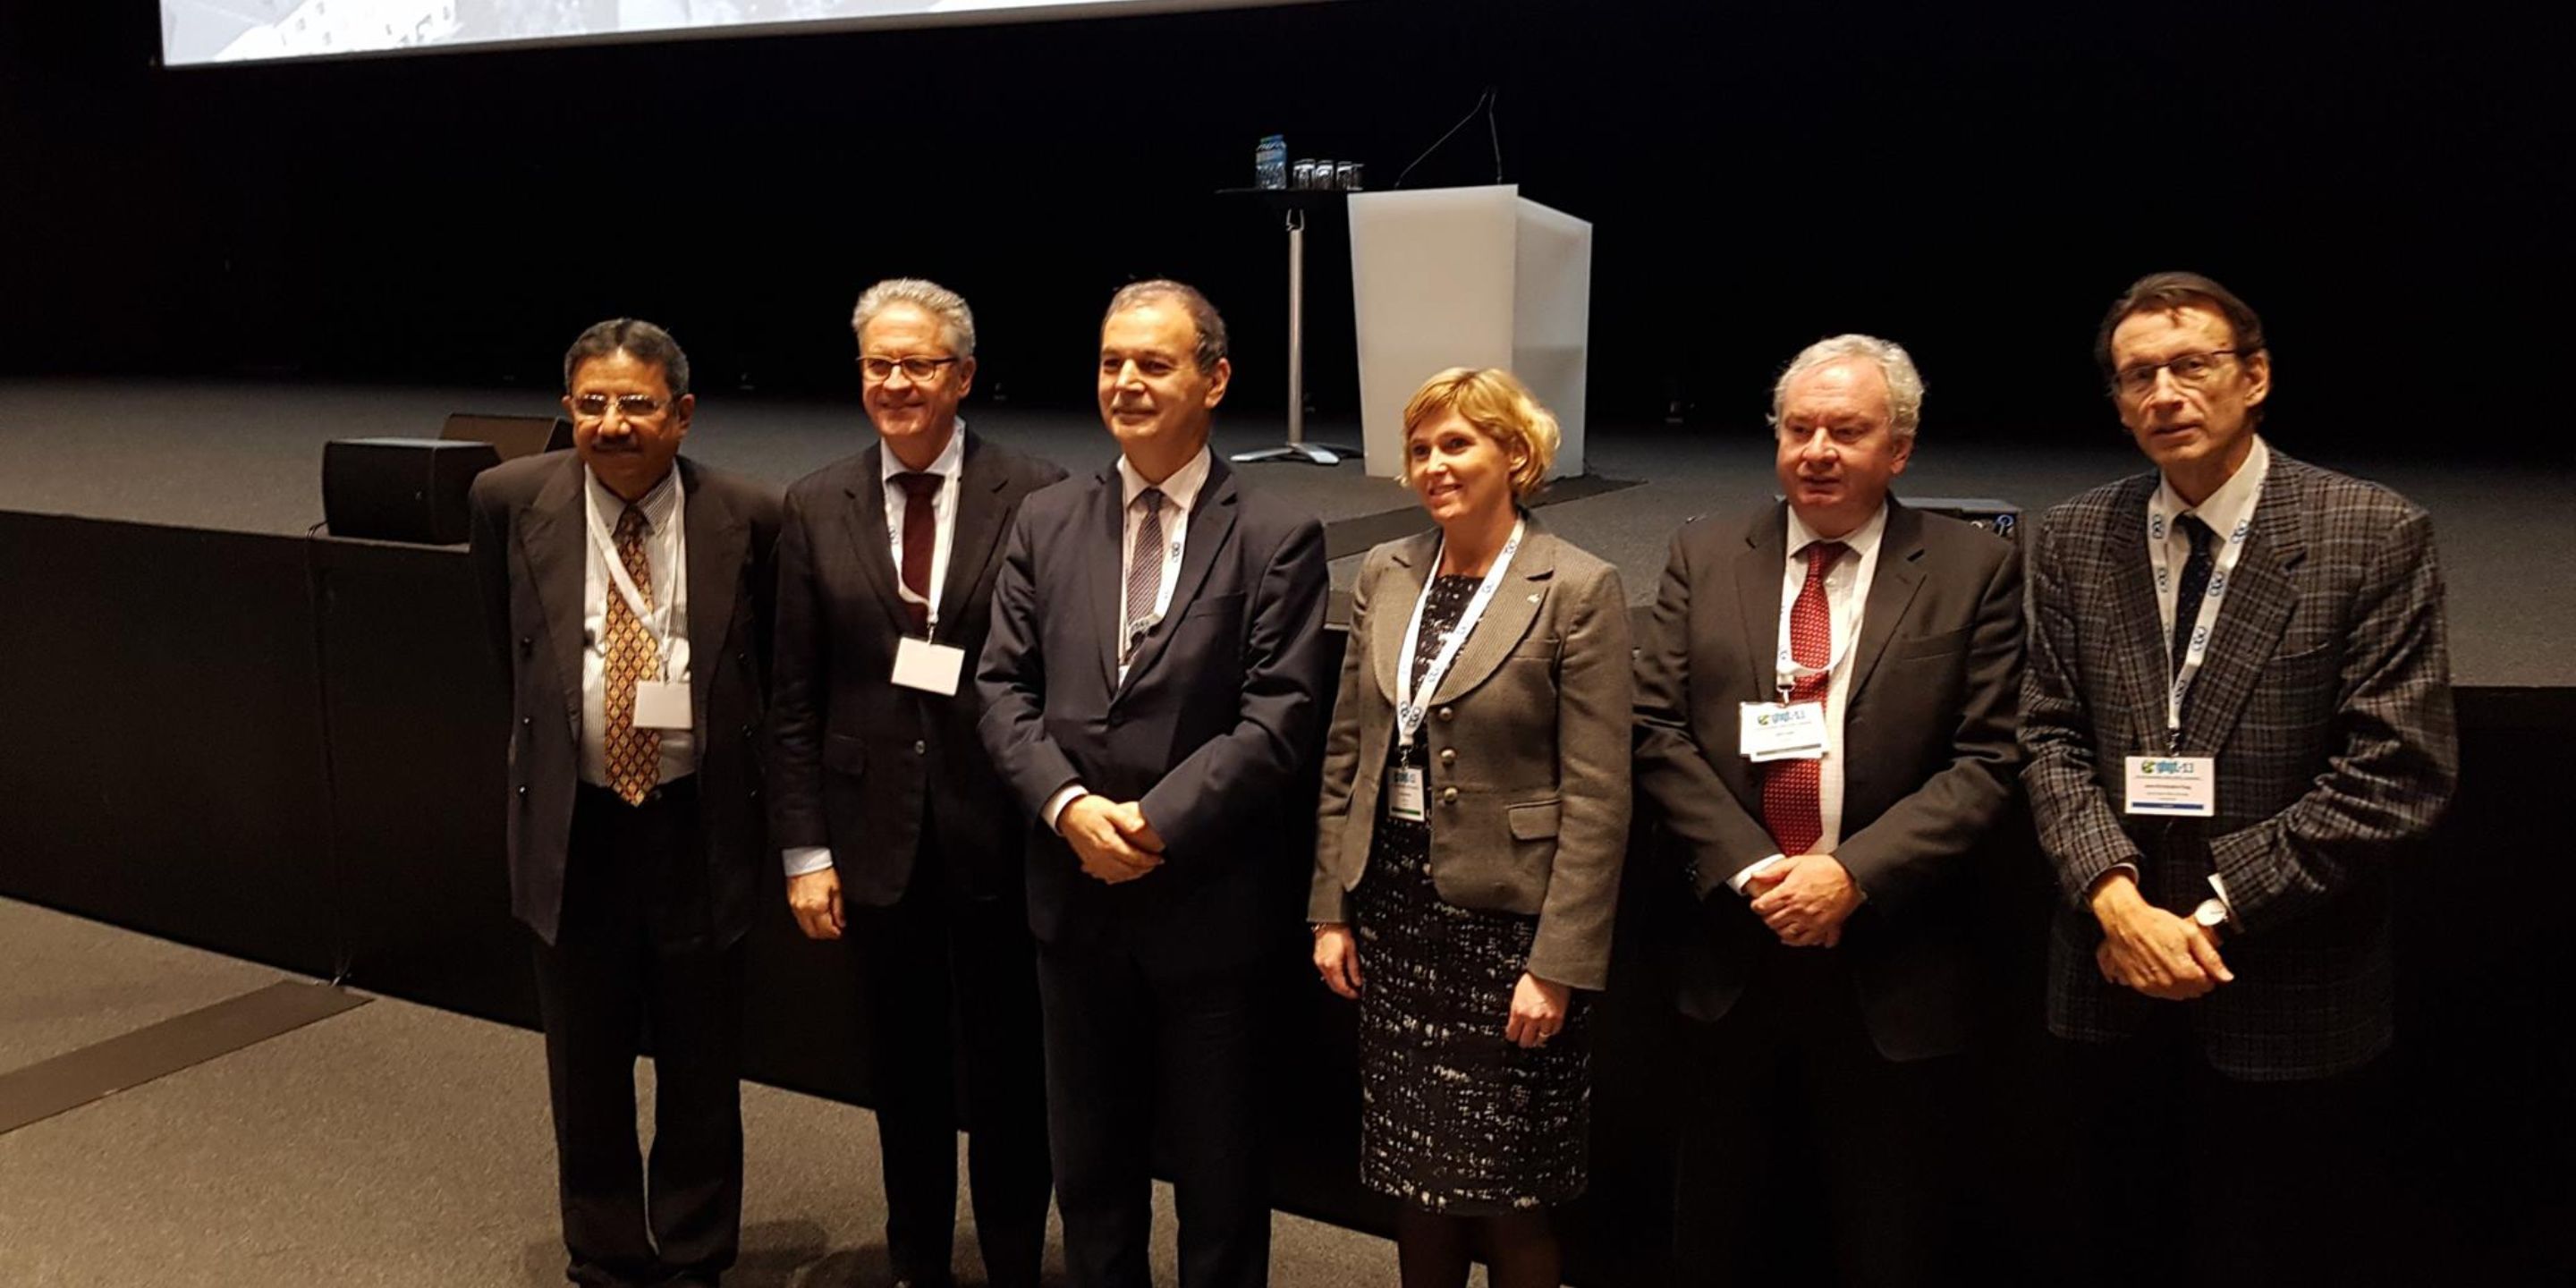 Trude with other keynote speakers at the GHGT conference in Lausanne, Switzerland.